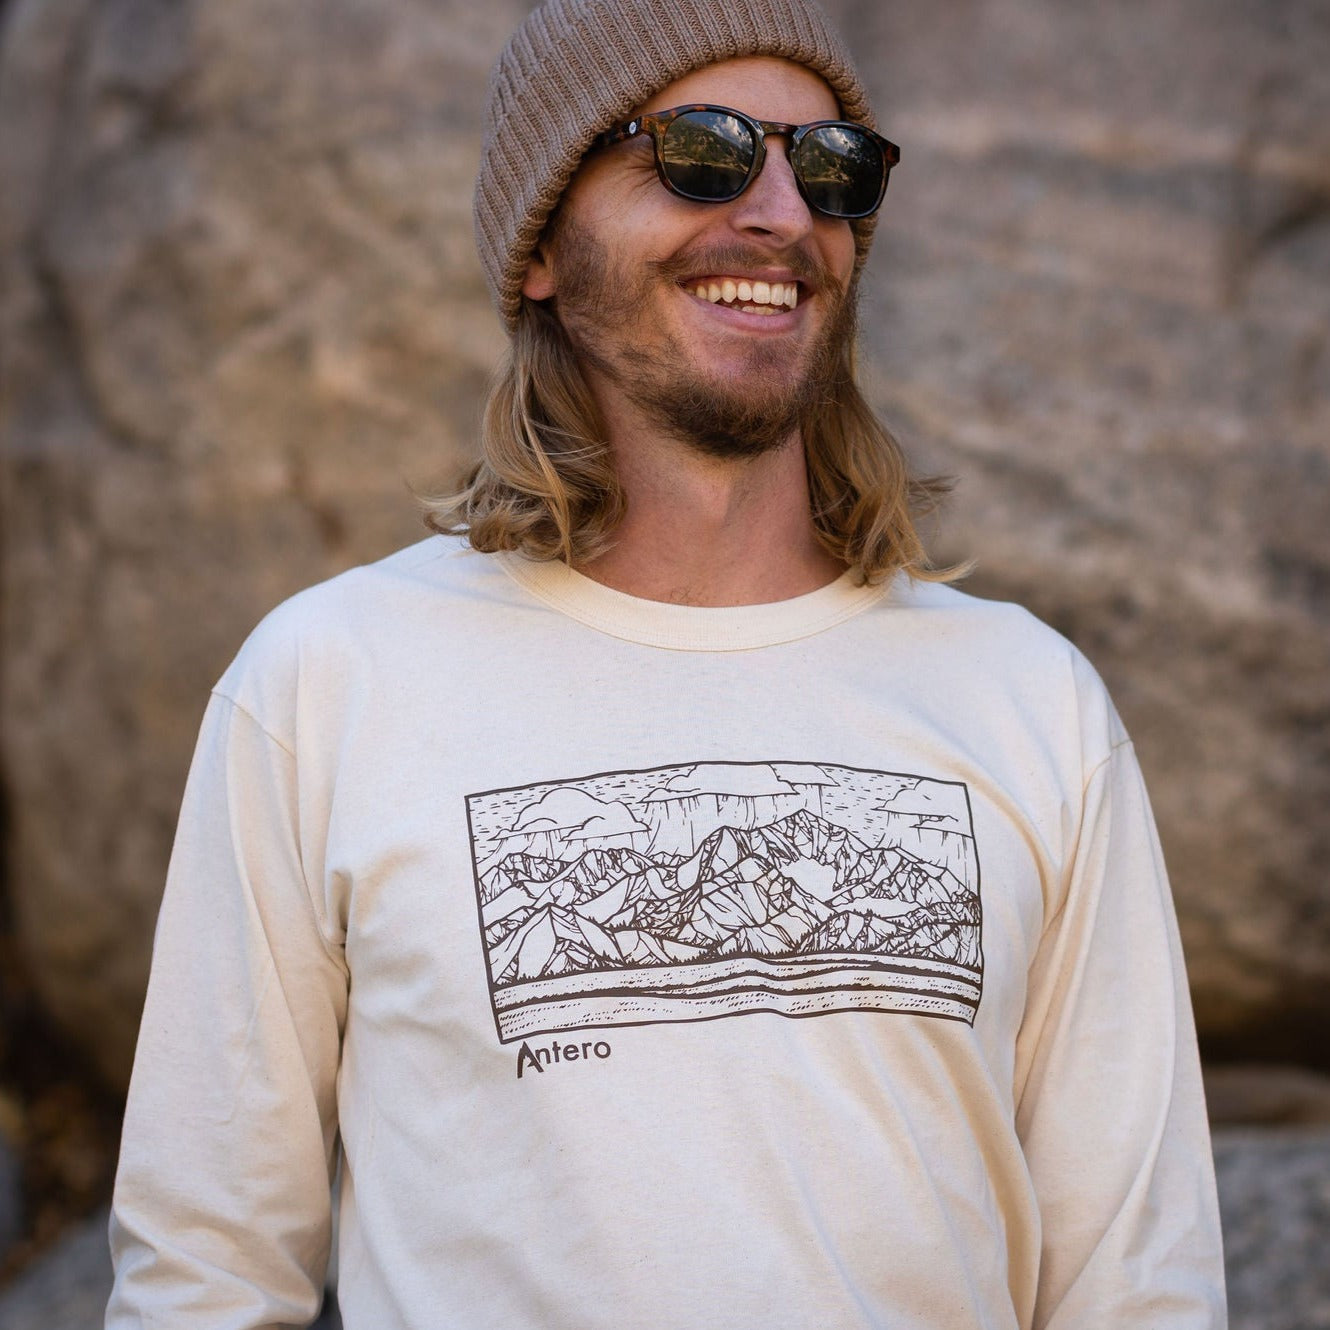  100% Organic Cotton   Color | Natural   Crew Neck  Ribbed cuff  Made in the USA  Features artwork by local Salida CO artist Brinkley Messick